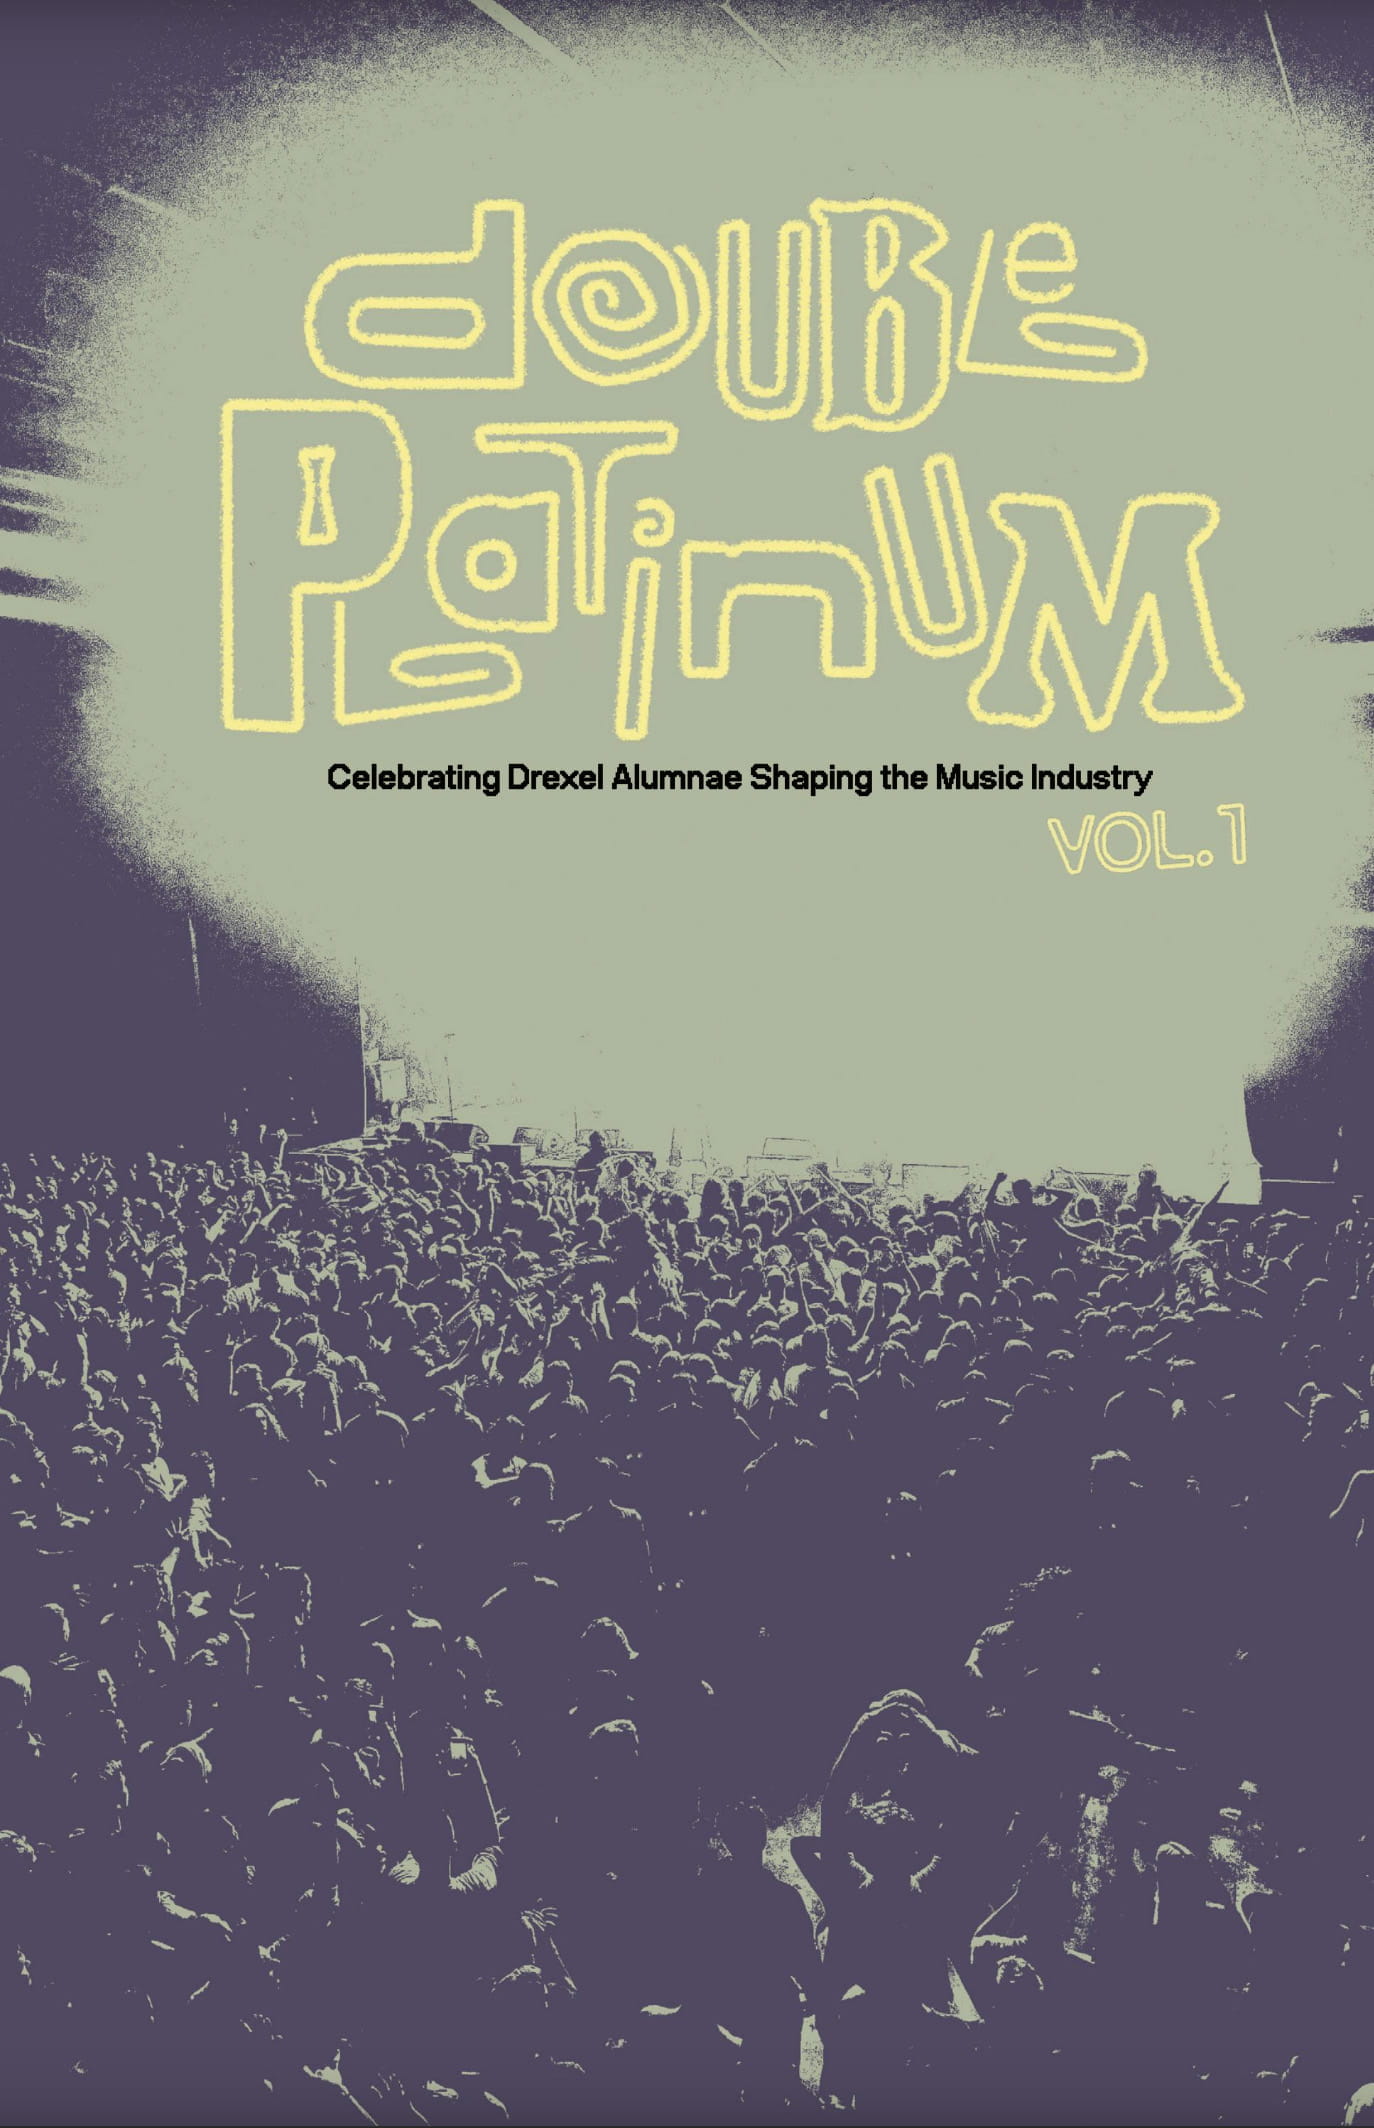 The cover of "Double Platinum" showing a large crowd and on stage is the text "Double Platnium. Celebrating Drexel Alumnae Shaping the Music Industry. Vol. 1.: